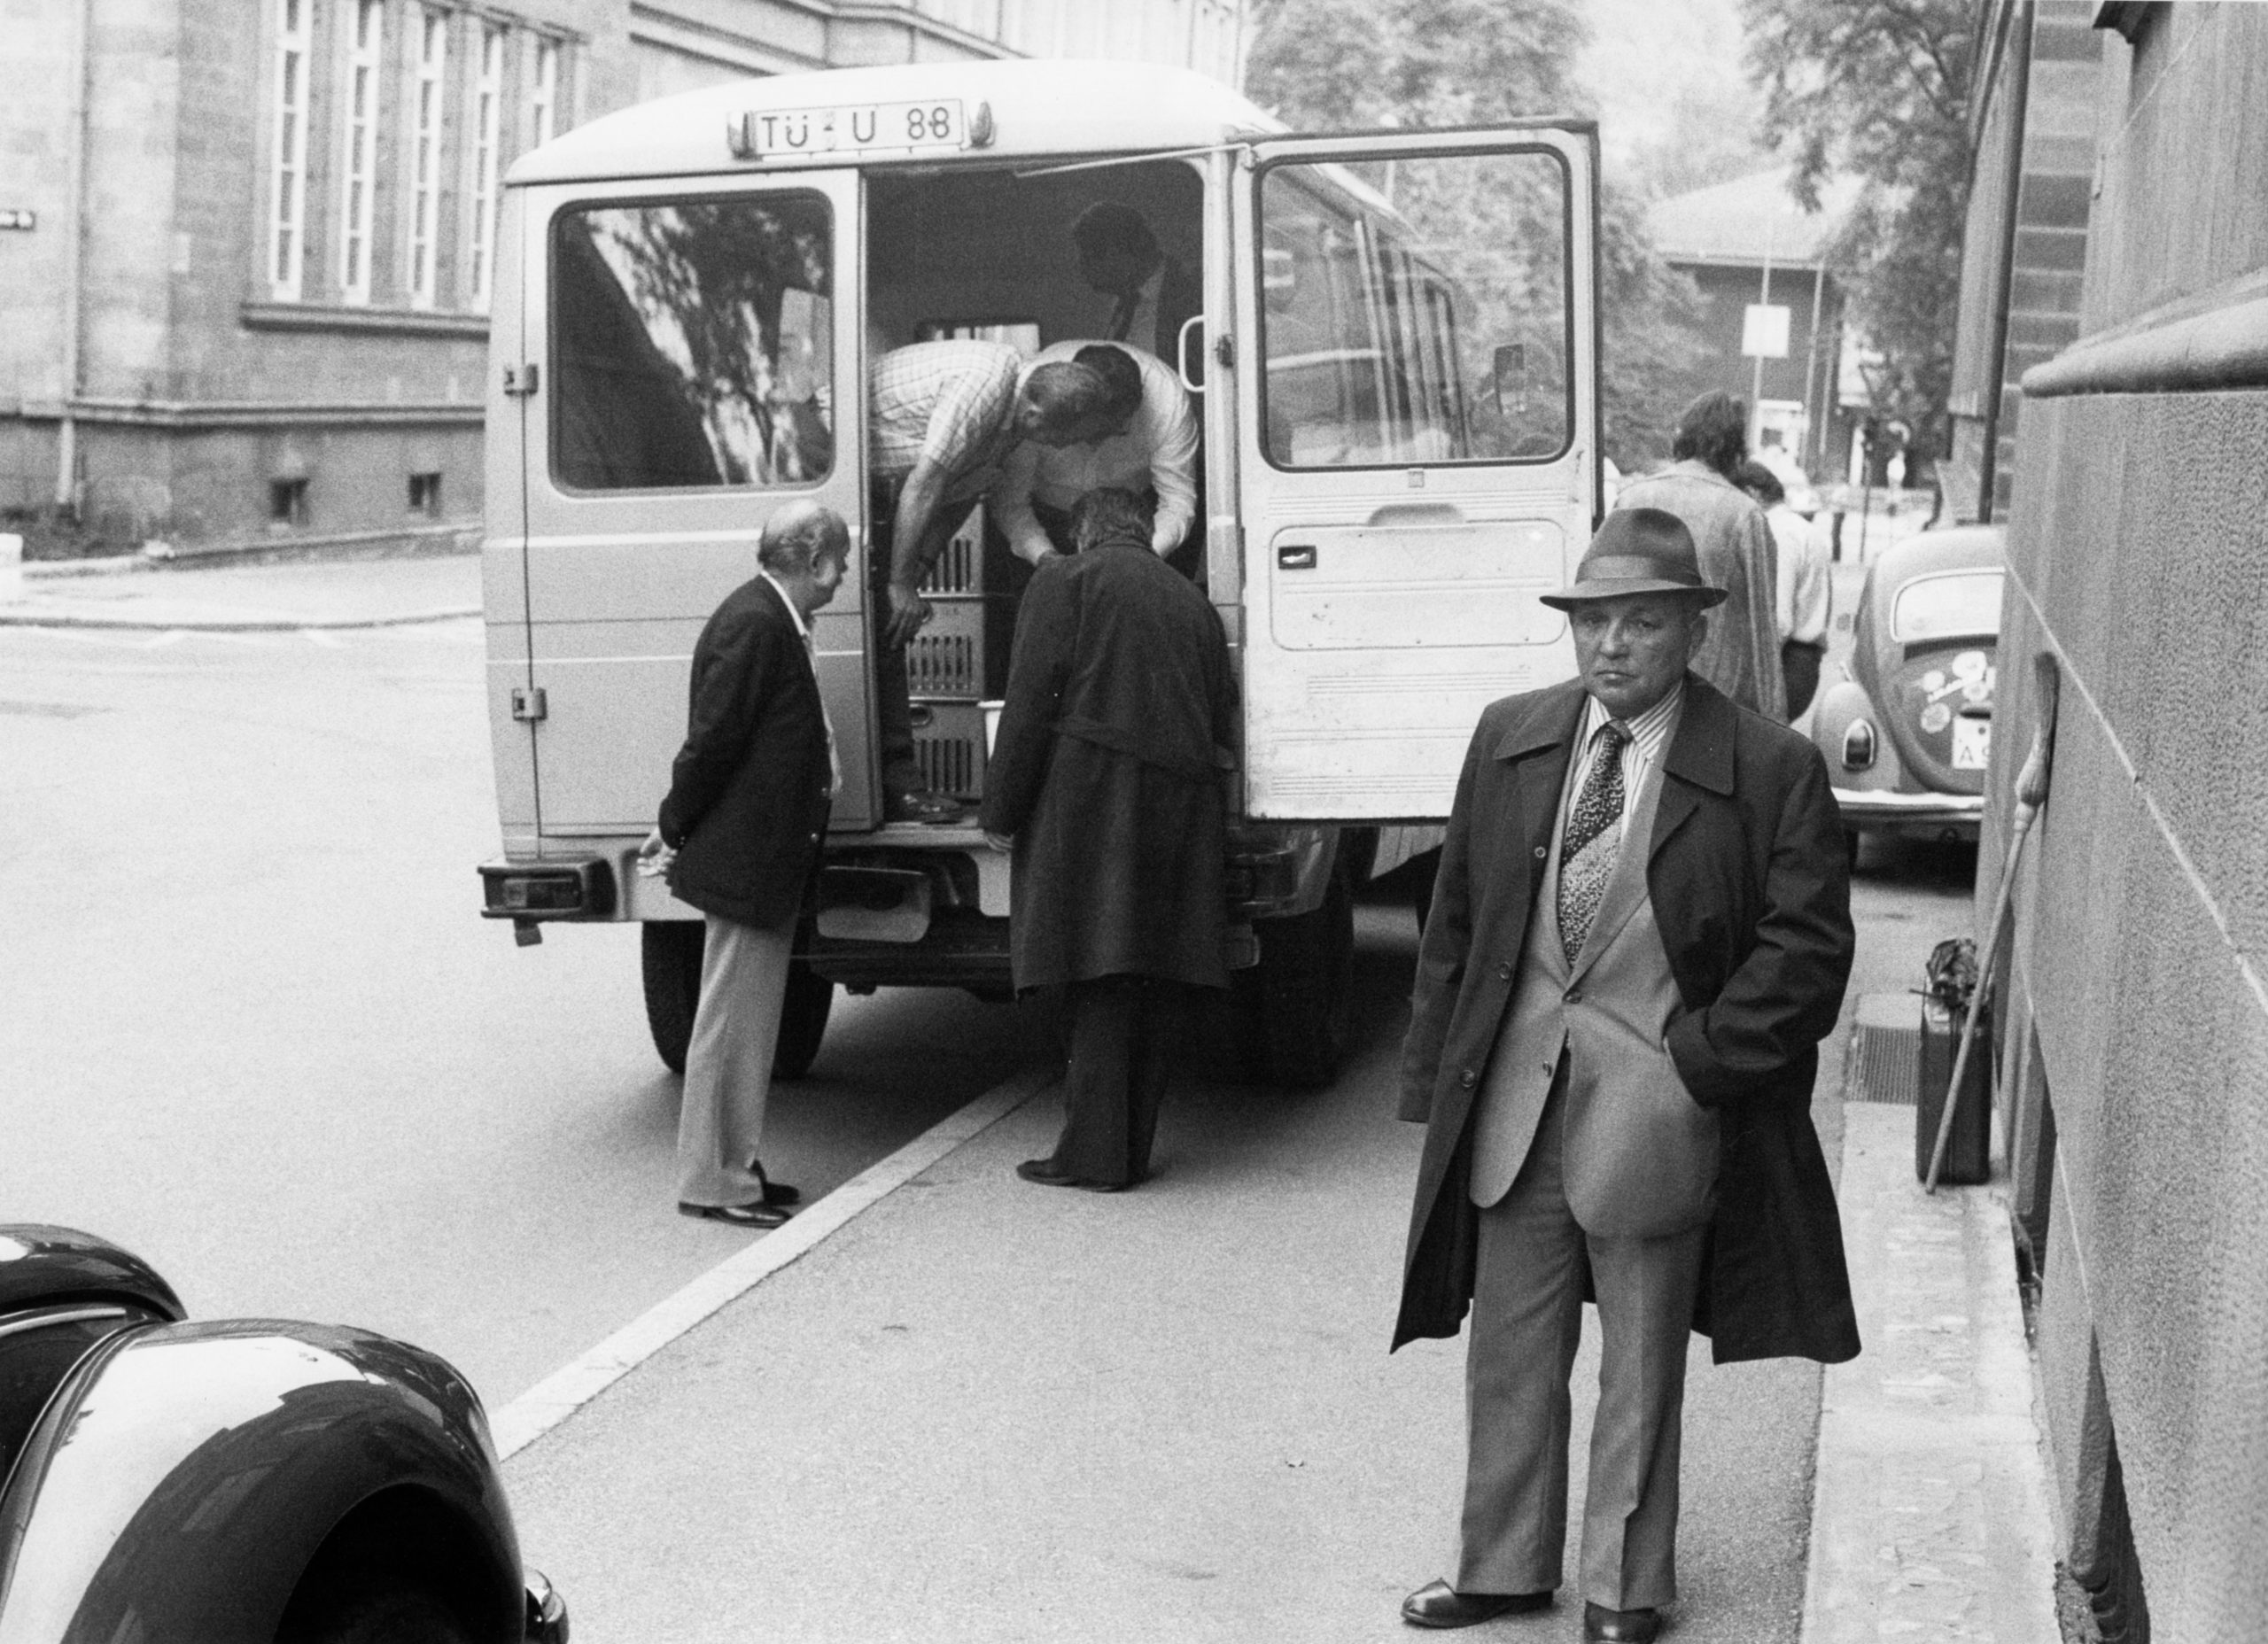 Removal of the “Nazi race files” to the Federal Archive in Koblenz, following the occupation of the Tübingen University archive in September 1981; in the foreground, Holocaust survivor Jakob Bamberger